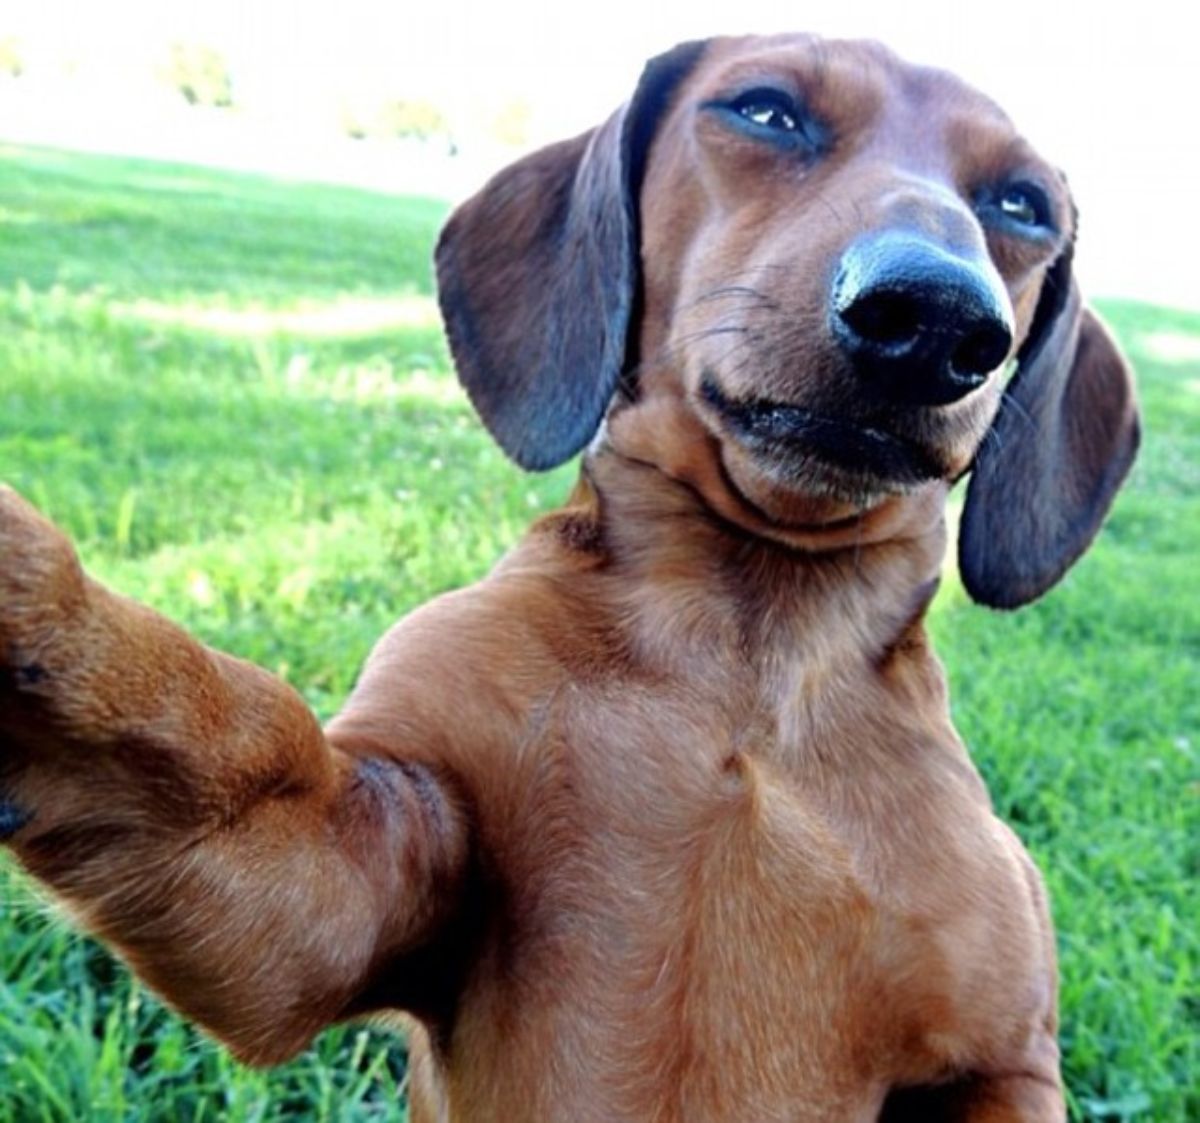 brown dachshund in a field with the leg outstretched looking like it's taking a selfie